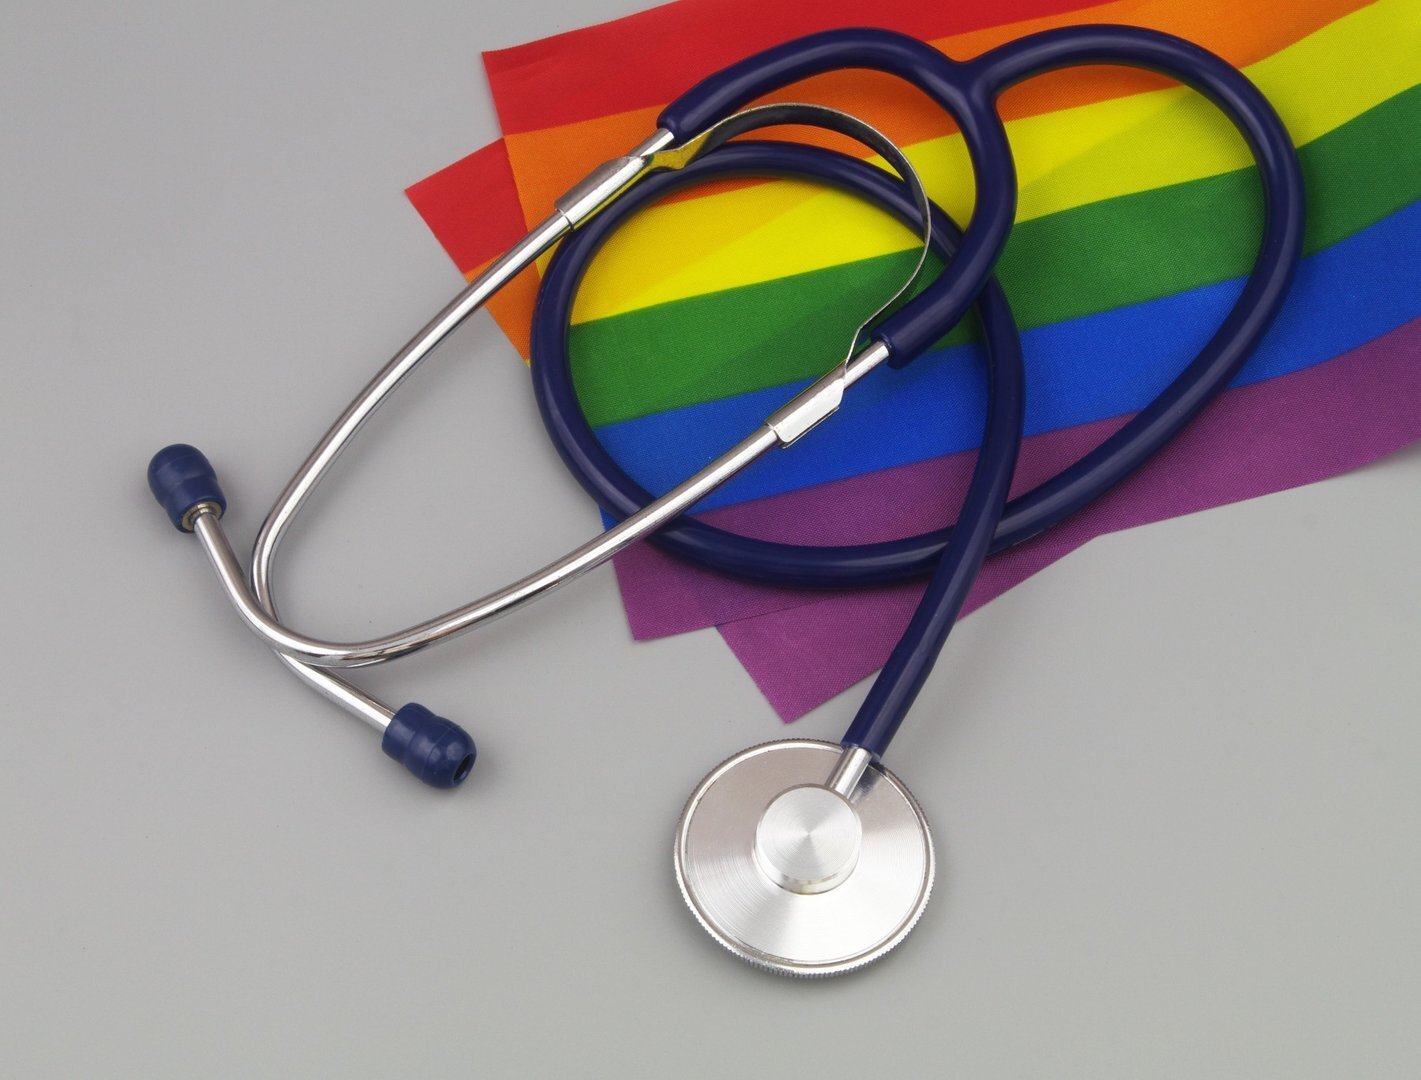 Study says stress discrimination add to cancer burden for LGBTQ+ Americans